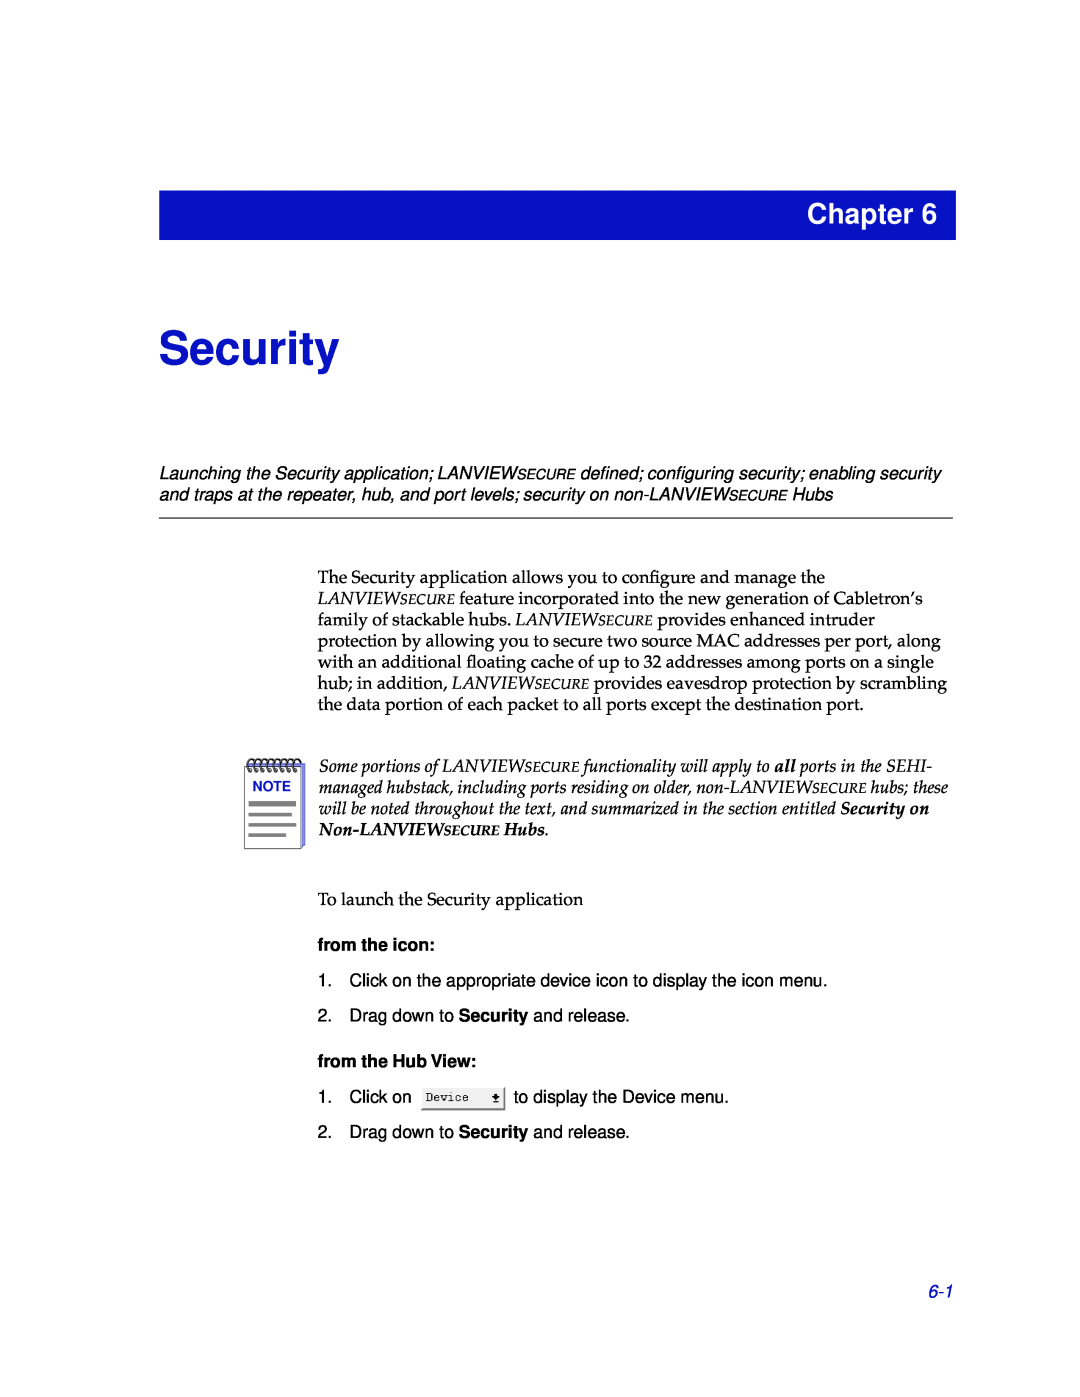 Cabletron Systems SEHI-22/24, SEHI-32/34 manual Security, Chapter, from the icon, from the Hub View 